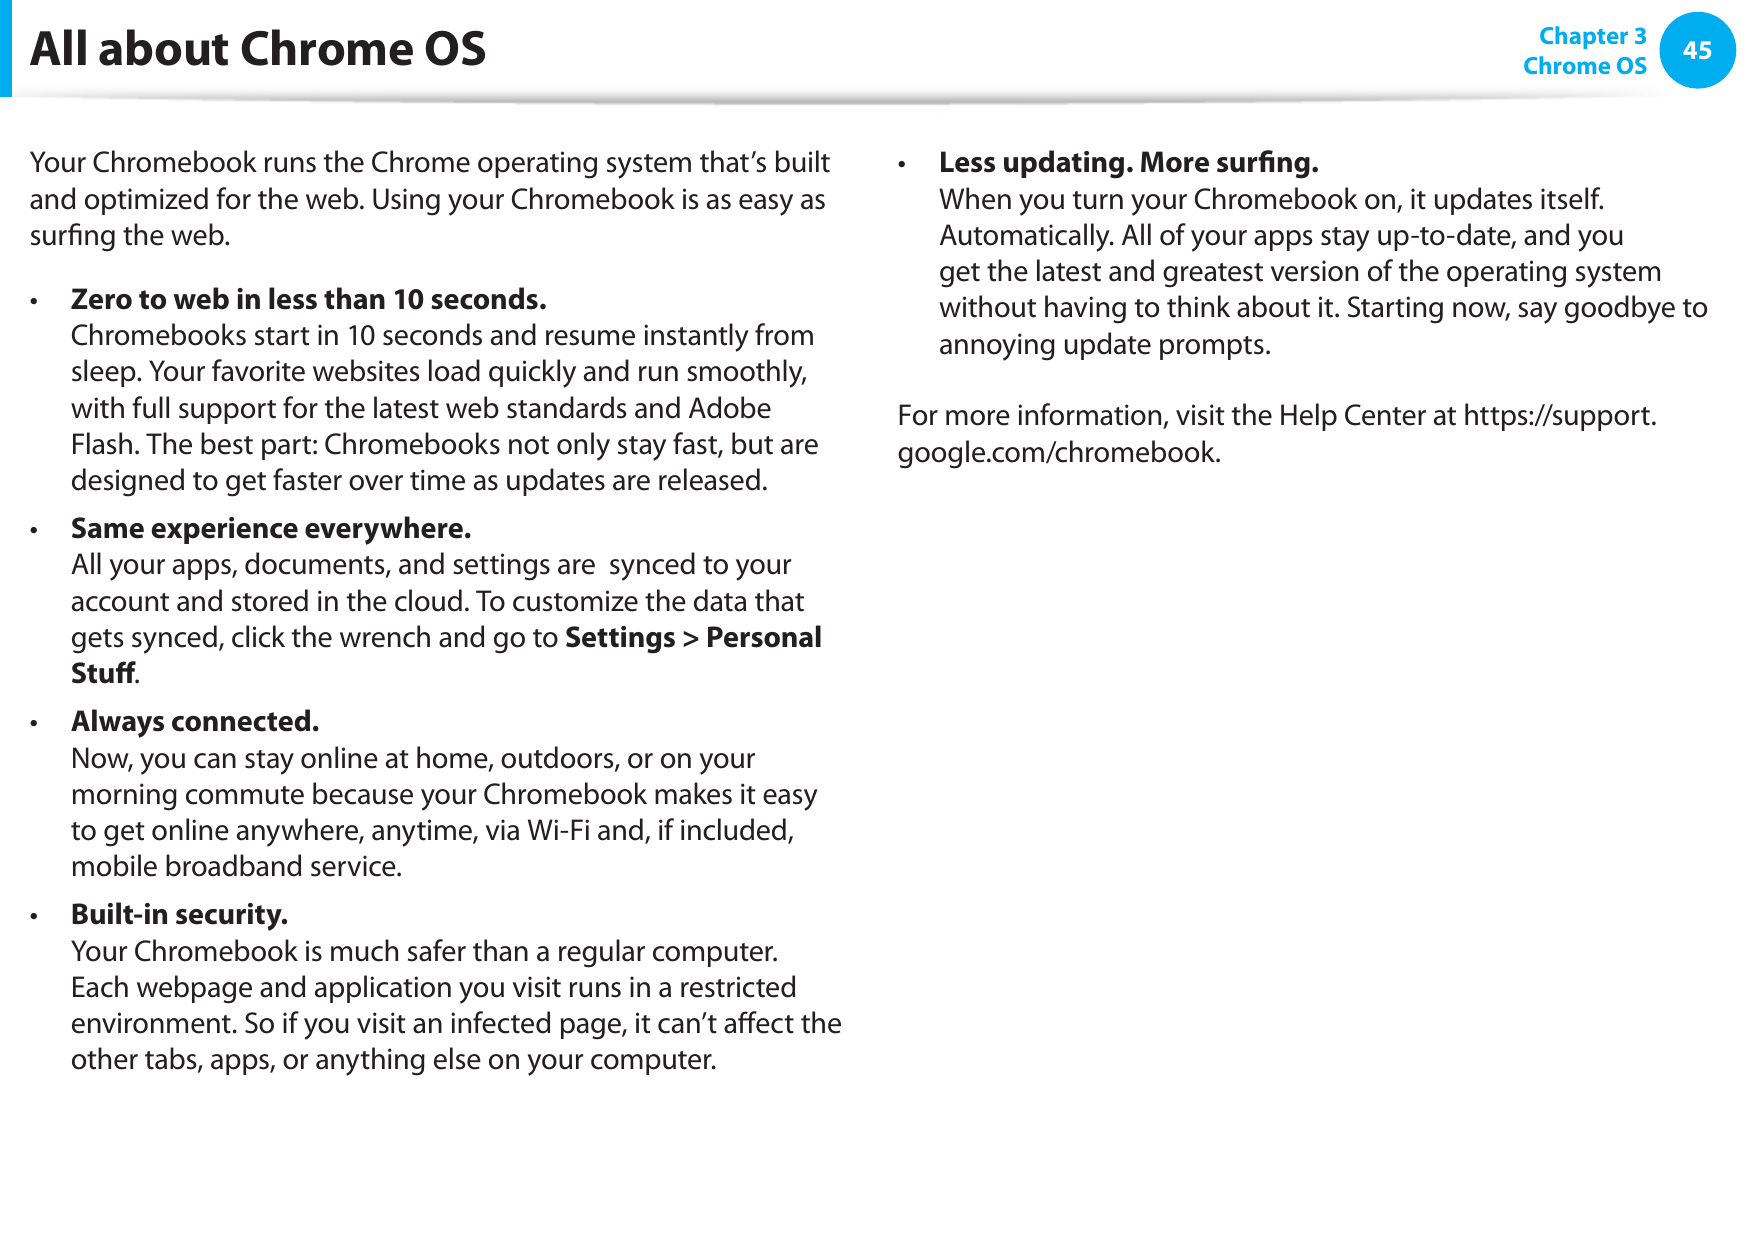 45Chapter 3 Chrome OSAll about Chrome OSYour Chromebook runs the Chrome operating system that’s built and optimized for the web. Using your Chromebook is as easy as surng the web.  Zero to web in less than 10 seconds. • Chromebooks start in 10 seconds and resume instantly from sleep. Your favorite websites load quickly and run smoothly, with full support for the latest web standards and Adobe Flash. The best part: Chromebooks not only stay fast, but are designed to get faster over time as updates are released.Same experience everywhere.•    All your apps, documents, and settings are  synced to your account and stored in the cloud. To customize the data that gets synced, click the wrench and go to Settings &gt; Personal Stu.  Always connected.•   Now, you can stay online at home, outdoors, or on your morning commute because your Chromebook makes it easy to get online anywhere, anytime, via Wi-Fi and, if included, mobile broadband service.Built-in security.•   Your Chromebook is much safer than a regular computer. Each webpage and application you visit runs in a restricted environment. So if you visit an infected page, it can’t aect the other tabs, apps, or anything else on your computer.  Less updating. More surng.•   When you turn your Chromebook on, it updates itself. Automatically. All of your apps stay up-to-date, and you get the latest and greatest version of the operating system without having to think about it. Starting now, say goodbye to annoying update prompts.For more information, visit the Help Center at https://support.google.com/chromebook. 